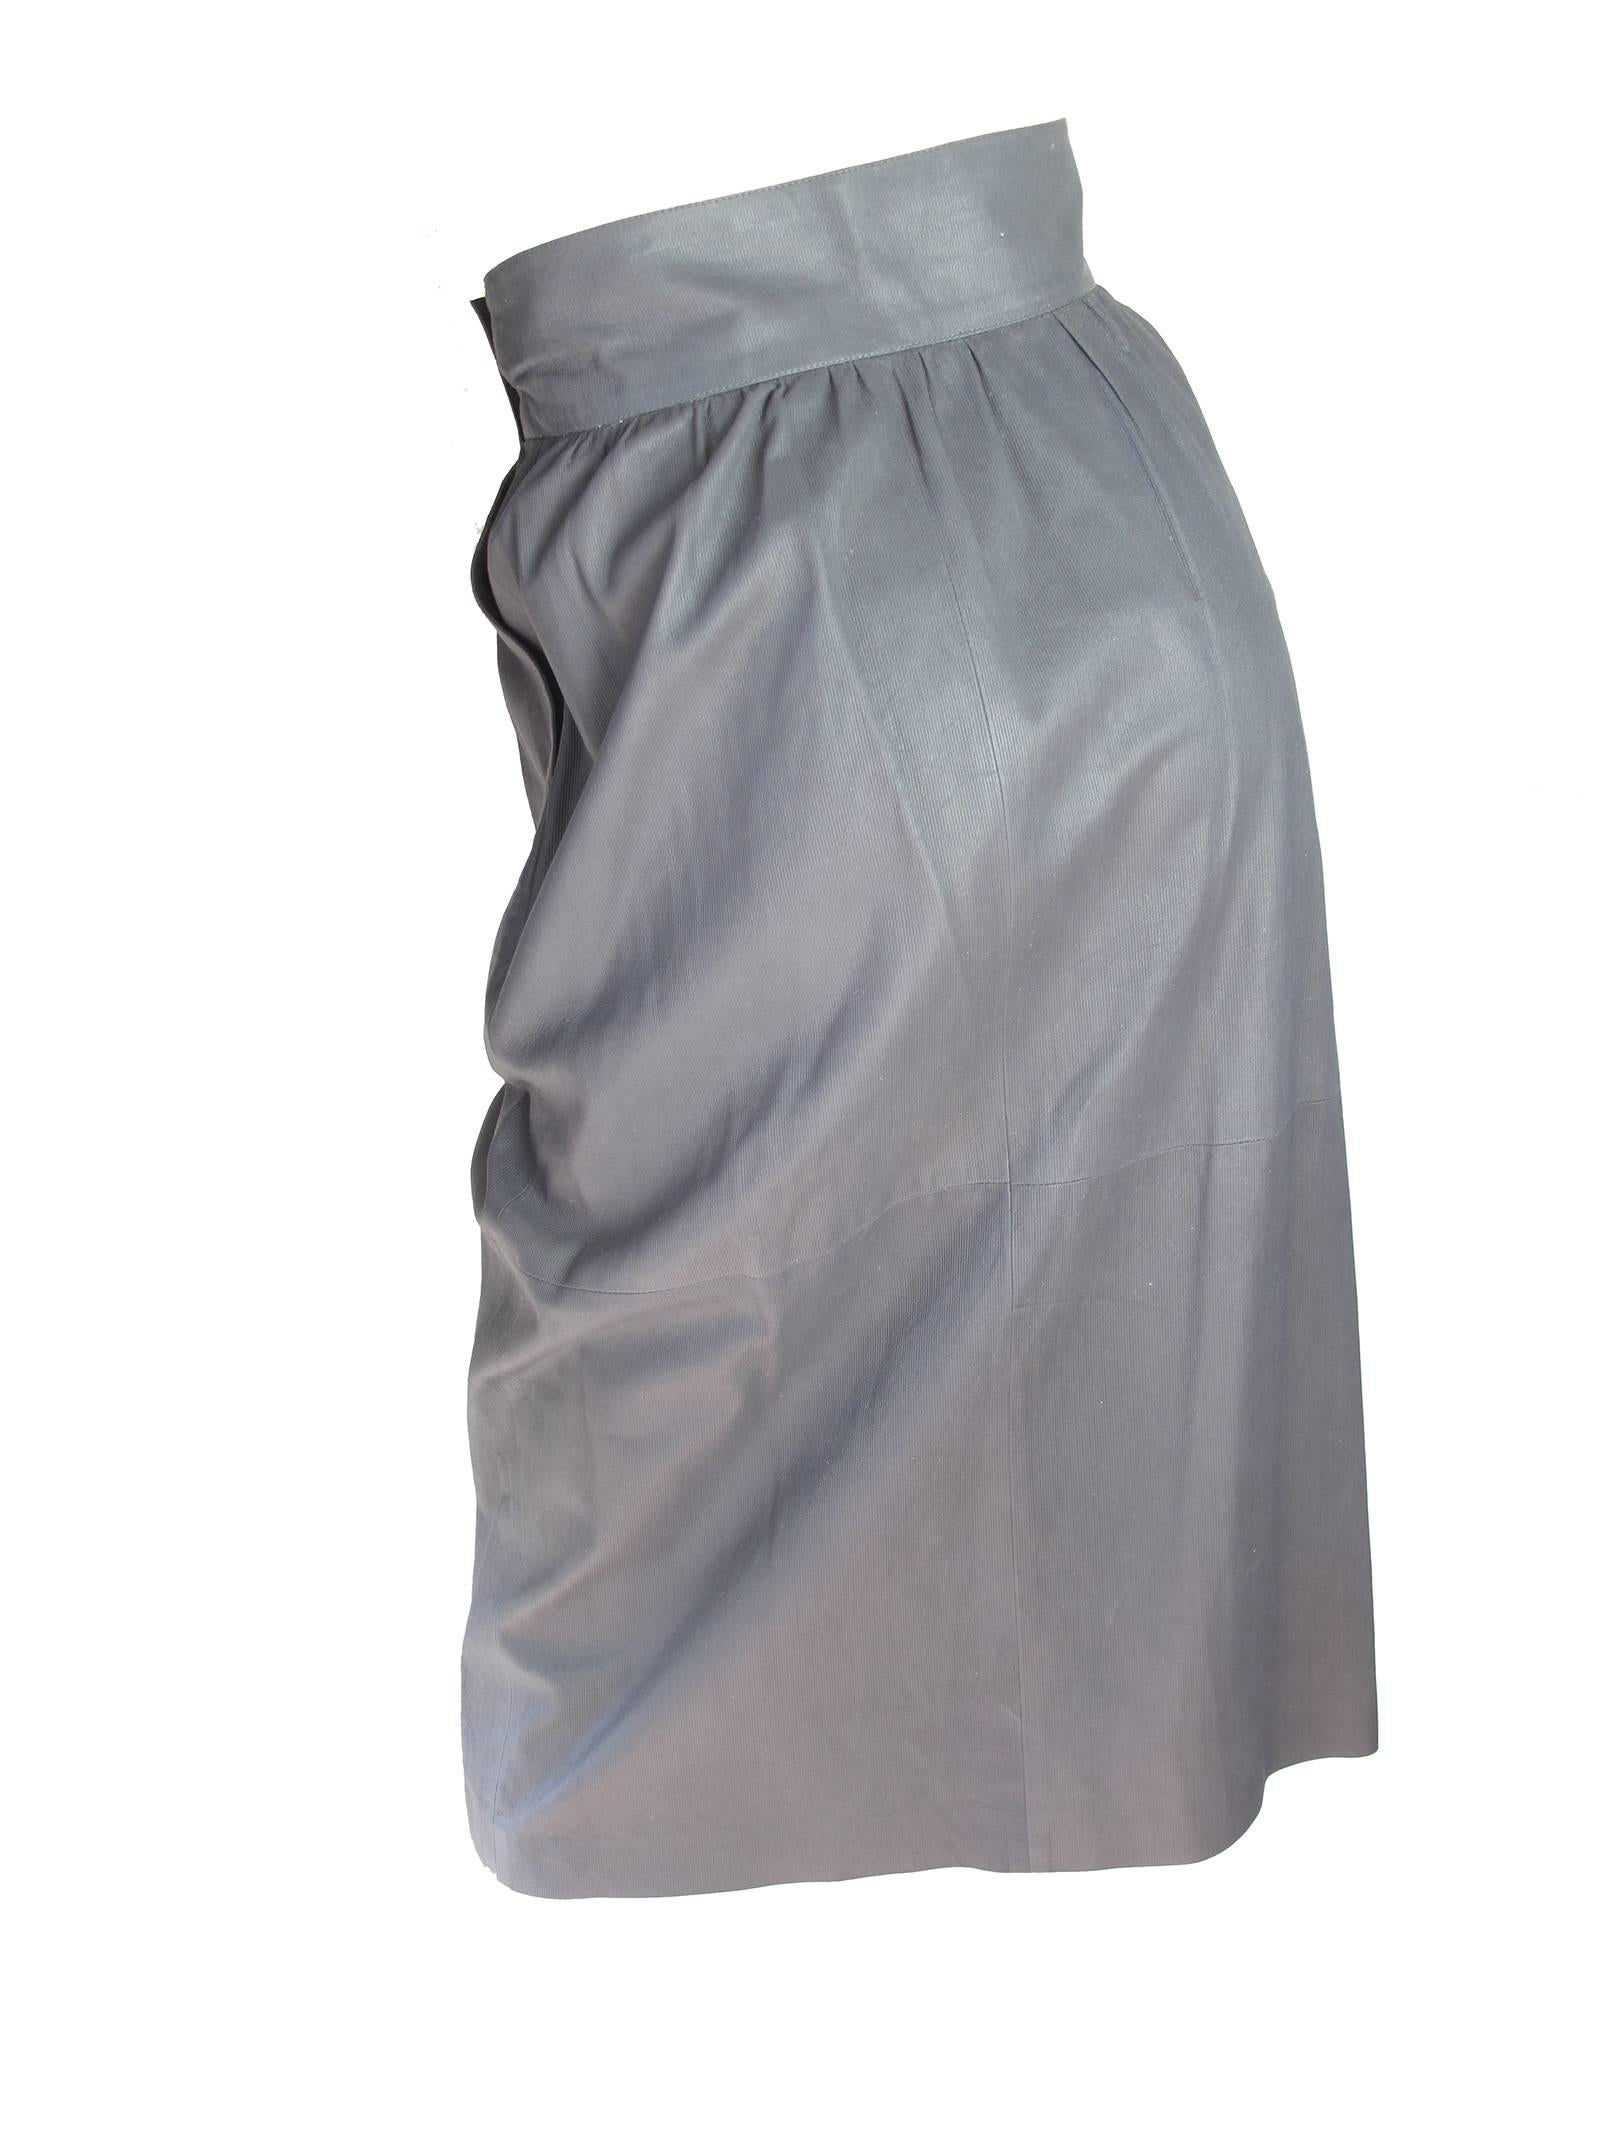 Valentino grey leather wrap skirt. Condition: Very good.  Size 6

We accept returns for refund, please see our terms.  We offer free ground shipping within the US.
